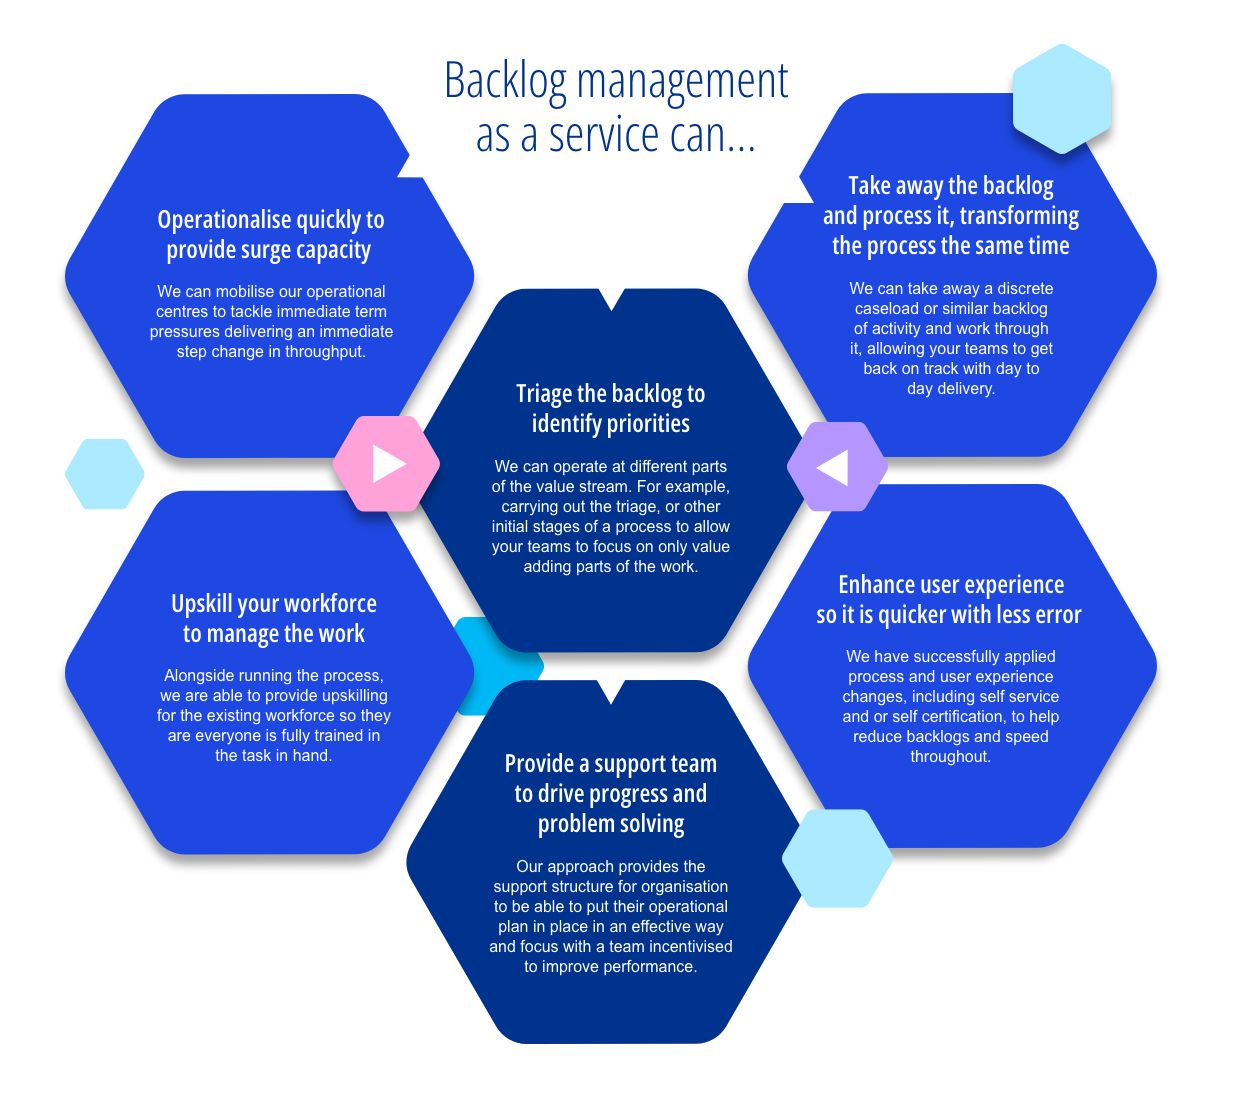 Backlog management as a service can...